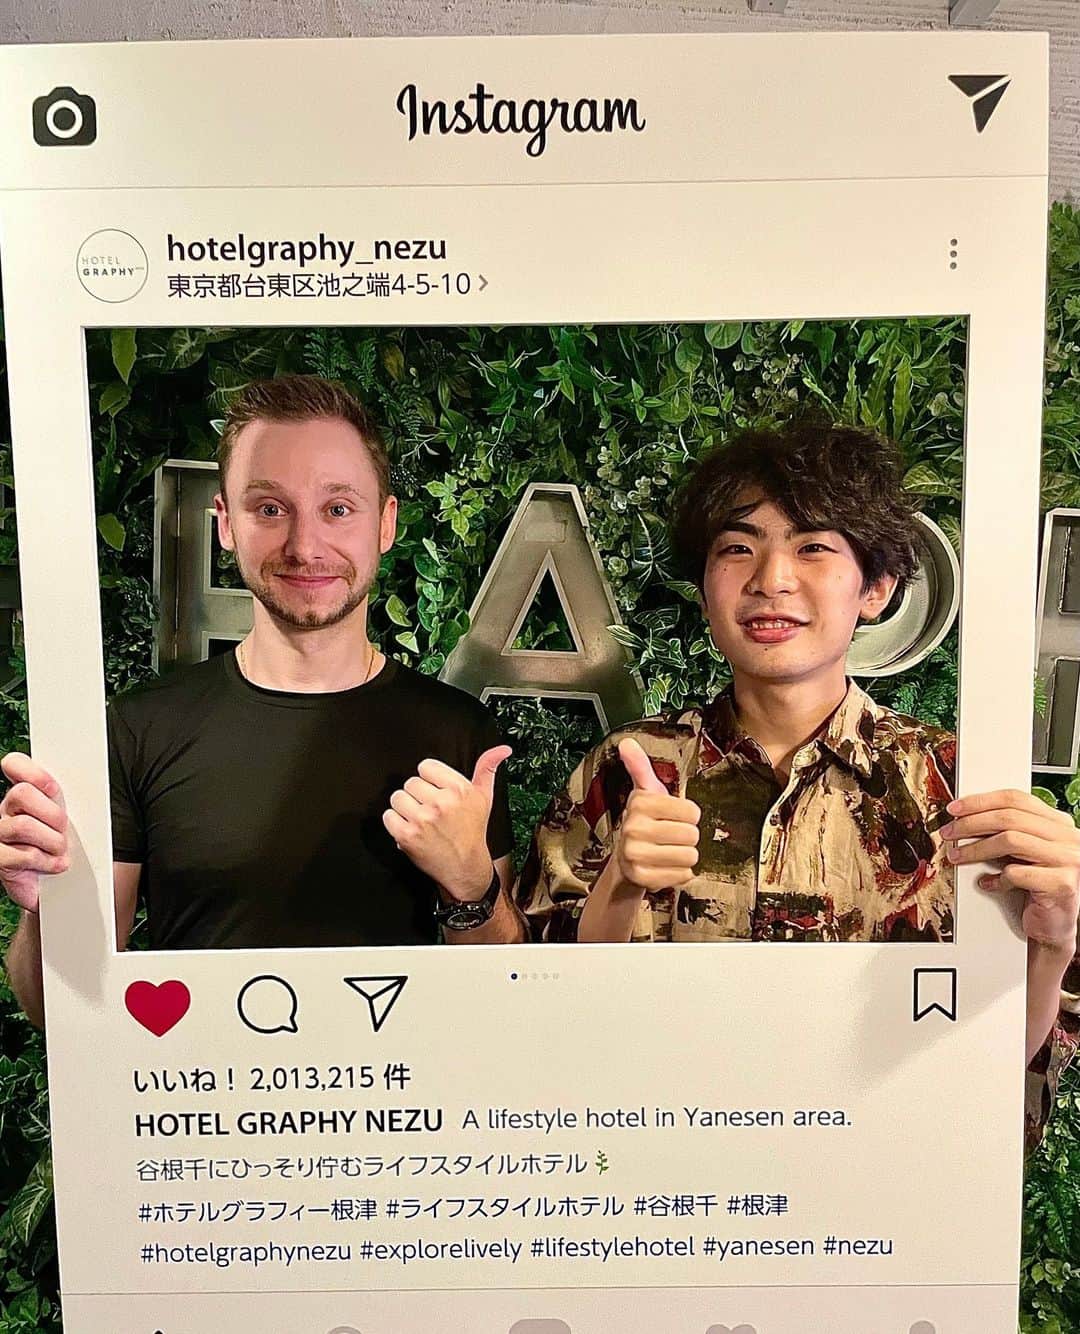 hotelgraphynezuさんのインスタグラム写真 - (hotelgraphynezuInstagram)「English below ⇩⁠ ⁠ ホテルグラフィーには、旅仲間や恋人、家族と忘れられないフォトジェニックな思い出を作れるスポットがたくさんあります。 ⁠ ⁠ ホテルグラフィー根津での一番の思い出や思い出スポット・出逢いは何ですか?⁠ ⁠ この投稿にコメントして教えてください。 🚩👇⁠ ⁠ ---------------------⁠ ⁠ Many spots at HOTEL GRAPHY can make unforgettable and photogenic memories to share with your trip buddy, your lover or your family. ⁠ ⁠ What is your best memory or memorable spot/ encounter at HOTEL GRAPHY NEZU?⁠ ⁠ Tell us by commenting this post ! 🚩👇⁠ ⁠ ⁠ ⁠ ⁠ ⁠ ⁠ ⁠ .⁠ .⁠ .⁠ #explorelively #lifestylehotel #hotelgraphynezu⁠ ⁠ ⁠ #hotel #hostel  #tokyohotel #tokyohostel ⁠ #uenohotel #travelmemories #hotellounge #tatamispace #hotellobby #pictures #instagramframe #hotelfacility ⁠ #triptojapan⁠ ⁠ ⁠ #ホテルグラフィー根津 #東京ホテル #東京ホステル #思い出　#ライフスタイルホテ #根津 #インスタフレーム #デザイナーホテル #東京ホステル #ホテルで過ごしたら #畳スペース #ホテルロビー #写真が好き #旅行の思い出」9月9日 20時45分 - hotelgraphy_nezu